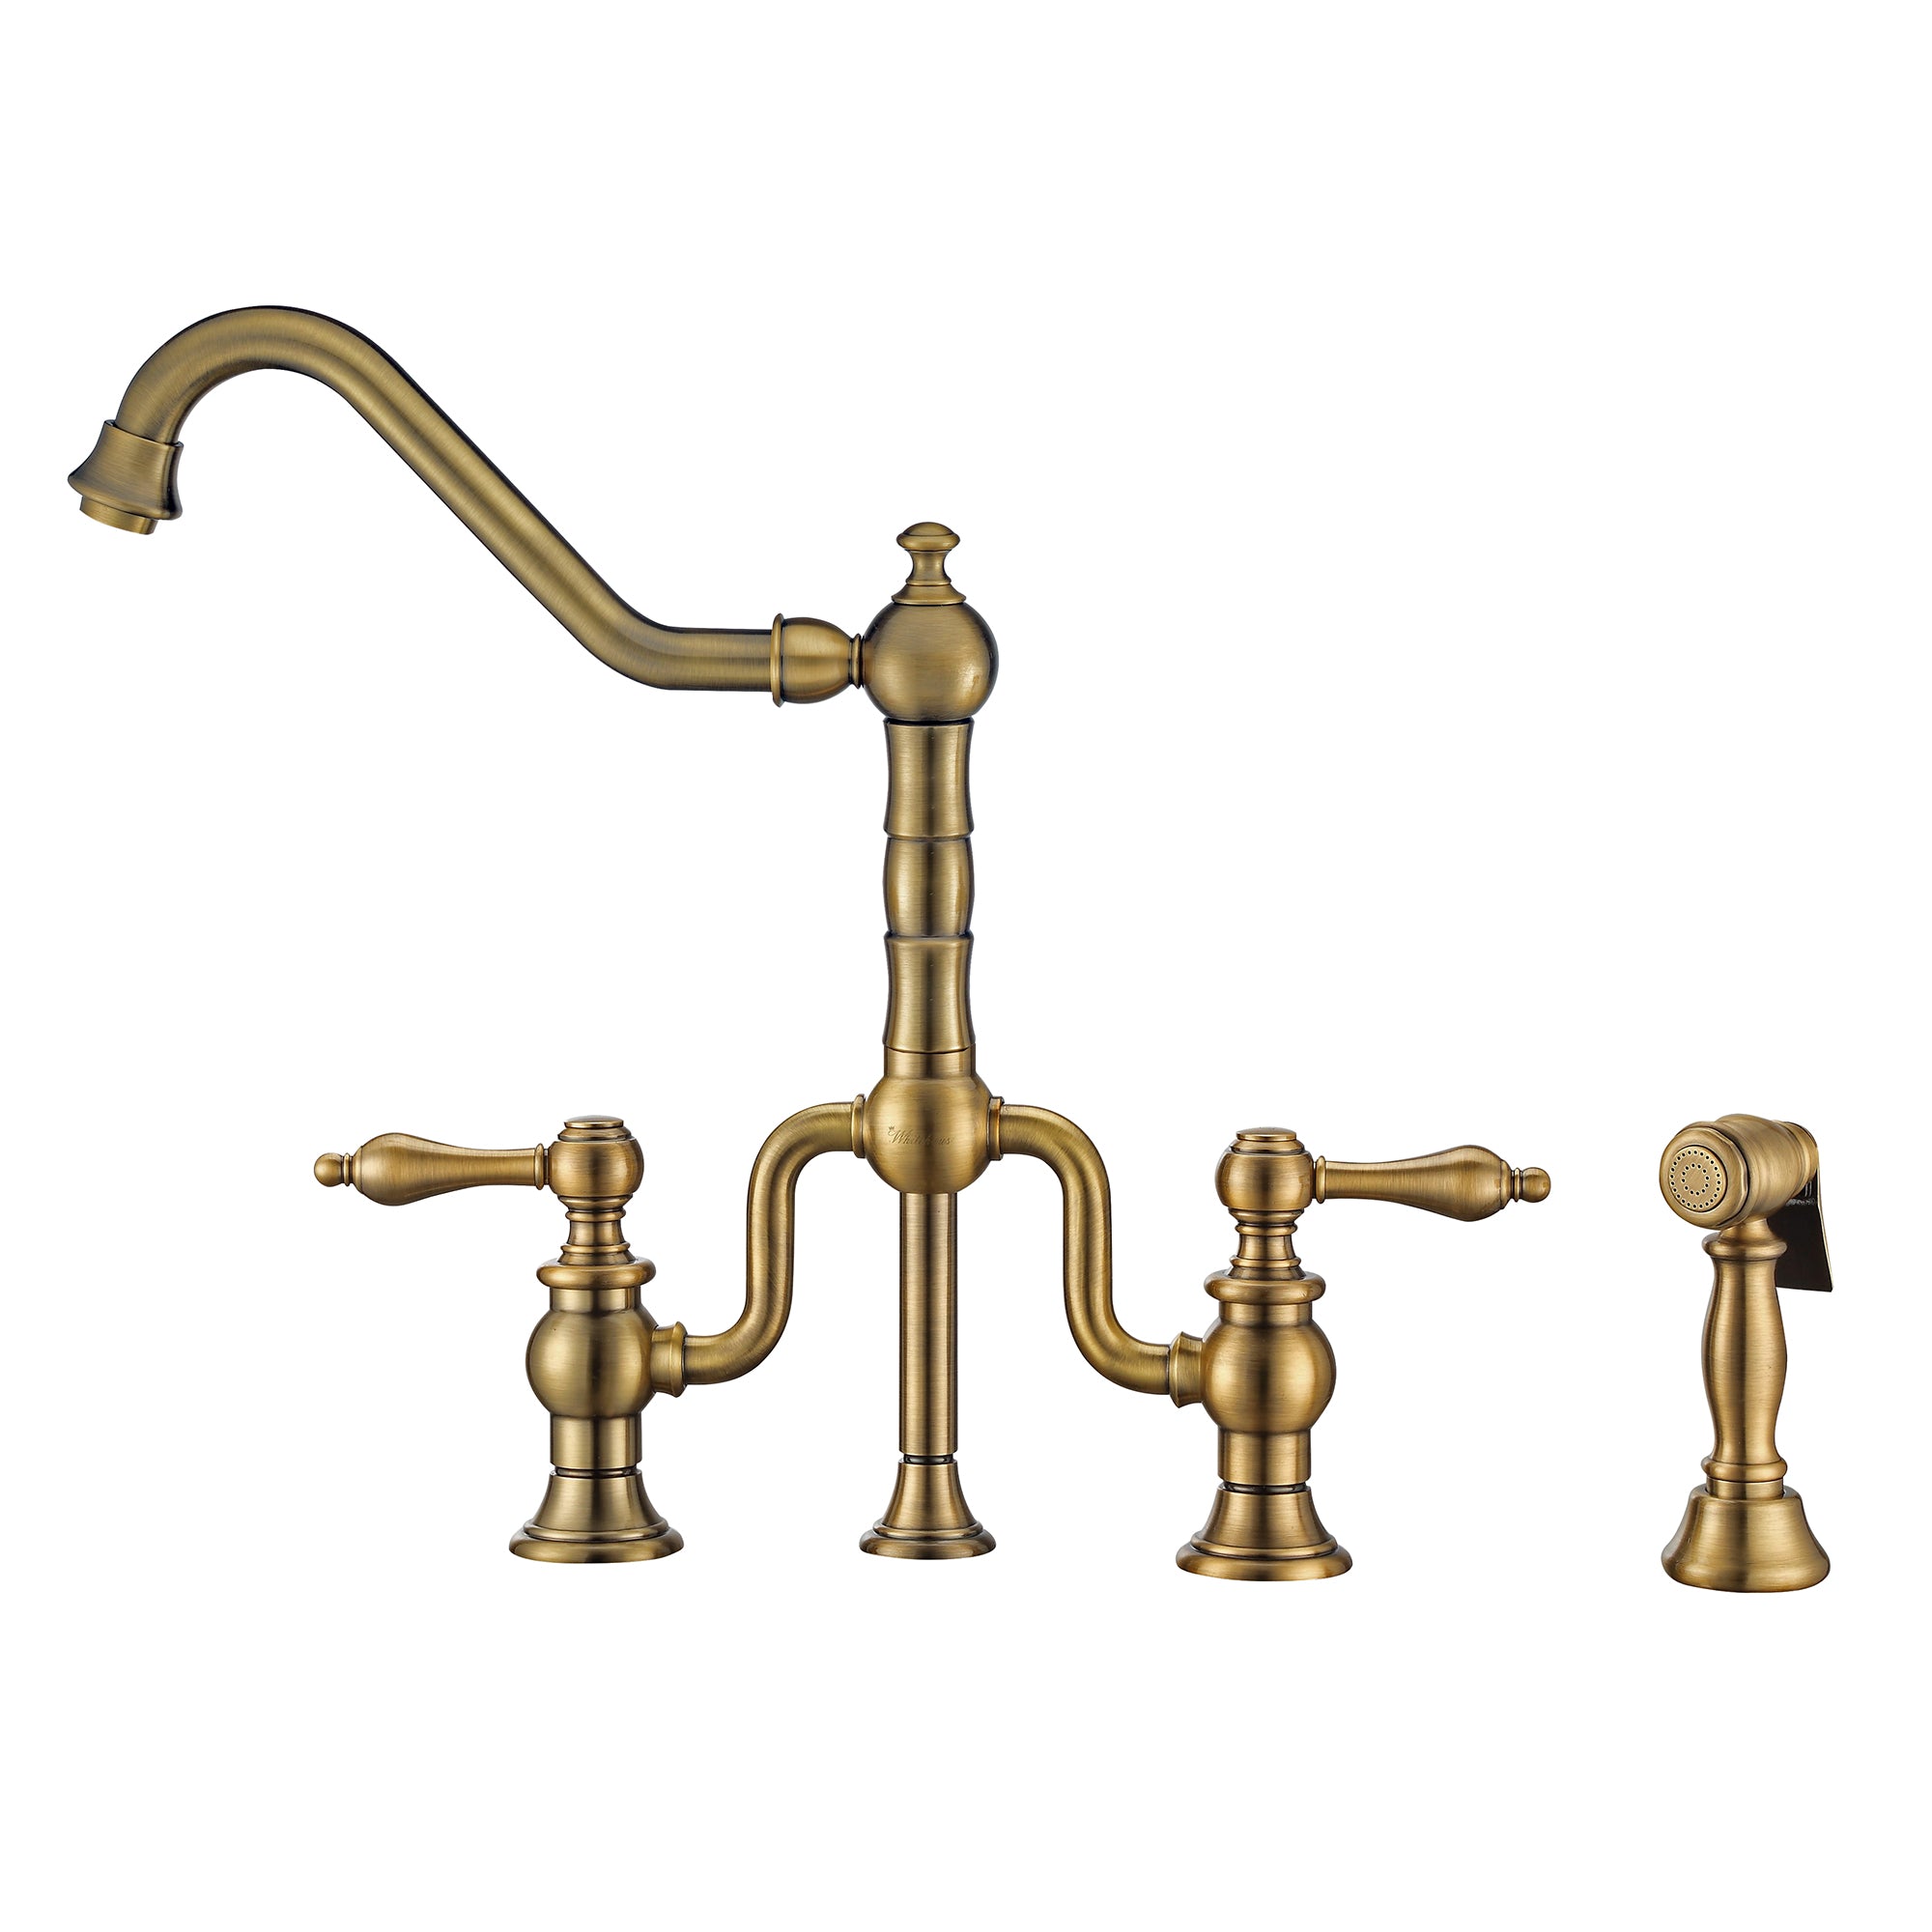 Twisthaus Plus Bridge Faucet with Long Traditional Swivel Spout, Lever Handles and Solid Brass Side Spray